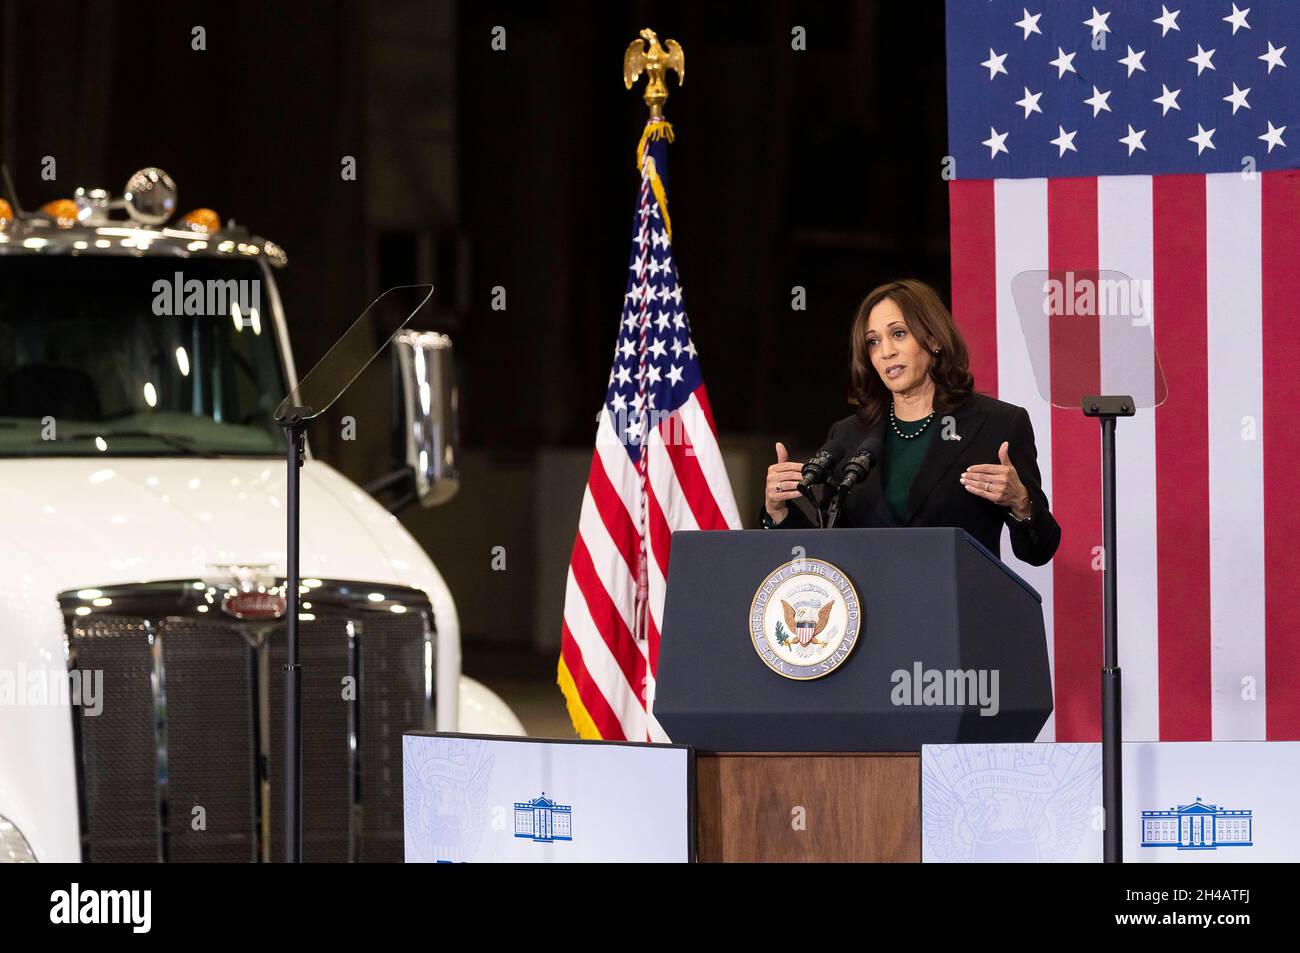 United States Vice President Kamala Harris speaks during an event promoting the Biden administration's Build Back Better agenda while standing in front electric tractor trailer trucks during an event in a Port Authority of New York and New Jersey hangar at John F. Kennedy International airport in the Queens borough of New York, New York, USA, 01 November 2021.Credit: Justin Lane/Pool via CNP /MediaPunch Stock Photo